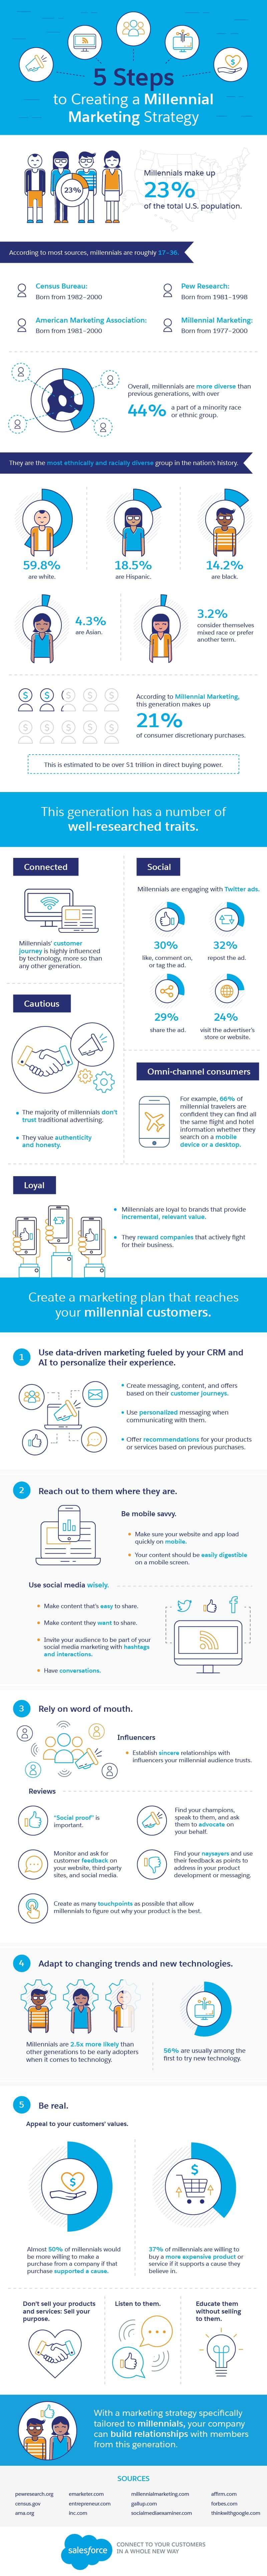 5 Steps to Creating a Millennial Marketing Strategy